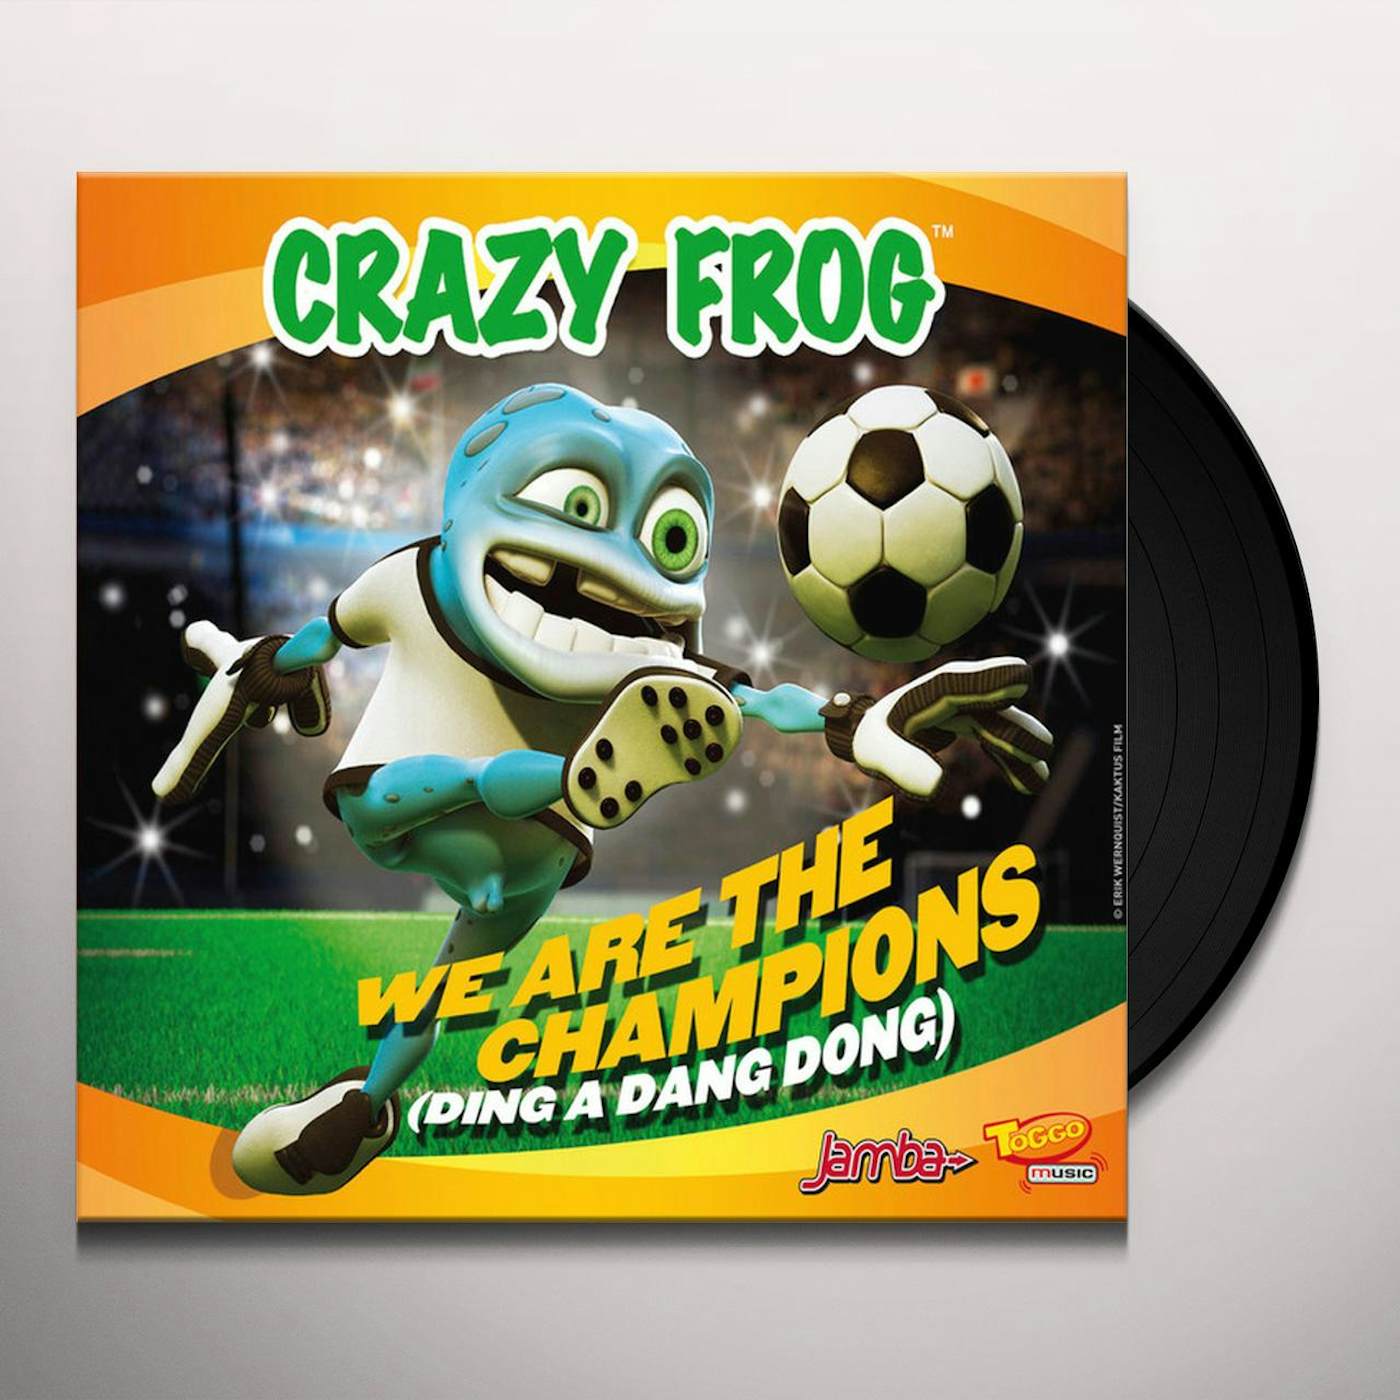 Crazy Frog WE ARE THE CHAMPIONS (DING DANG DON Vinyl Record